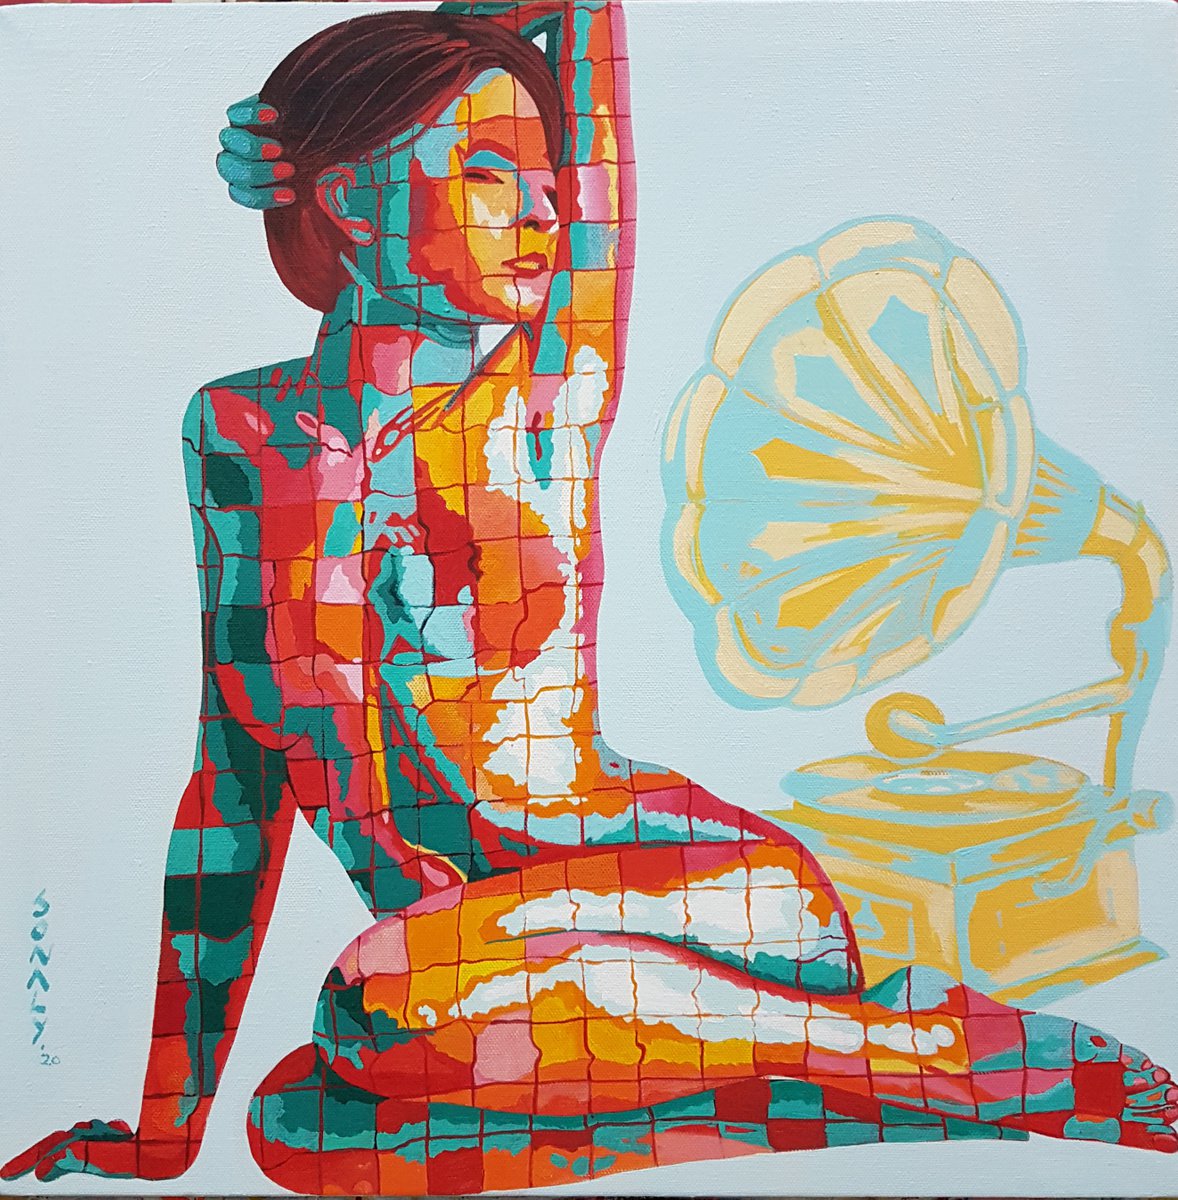 Lady and Gramophone by Sonaly Gandhi